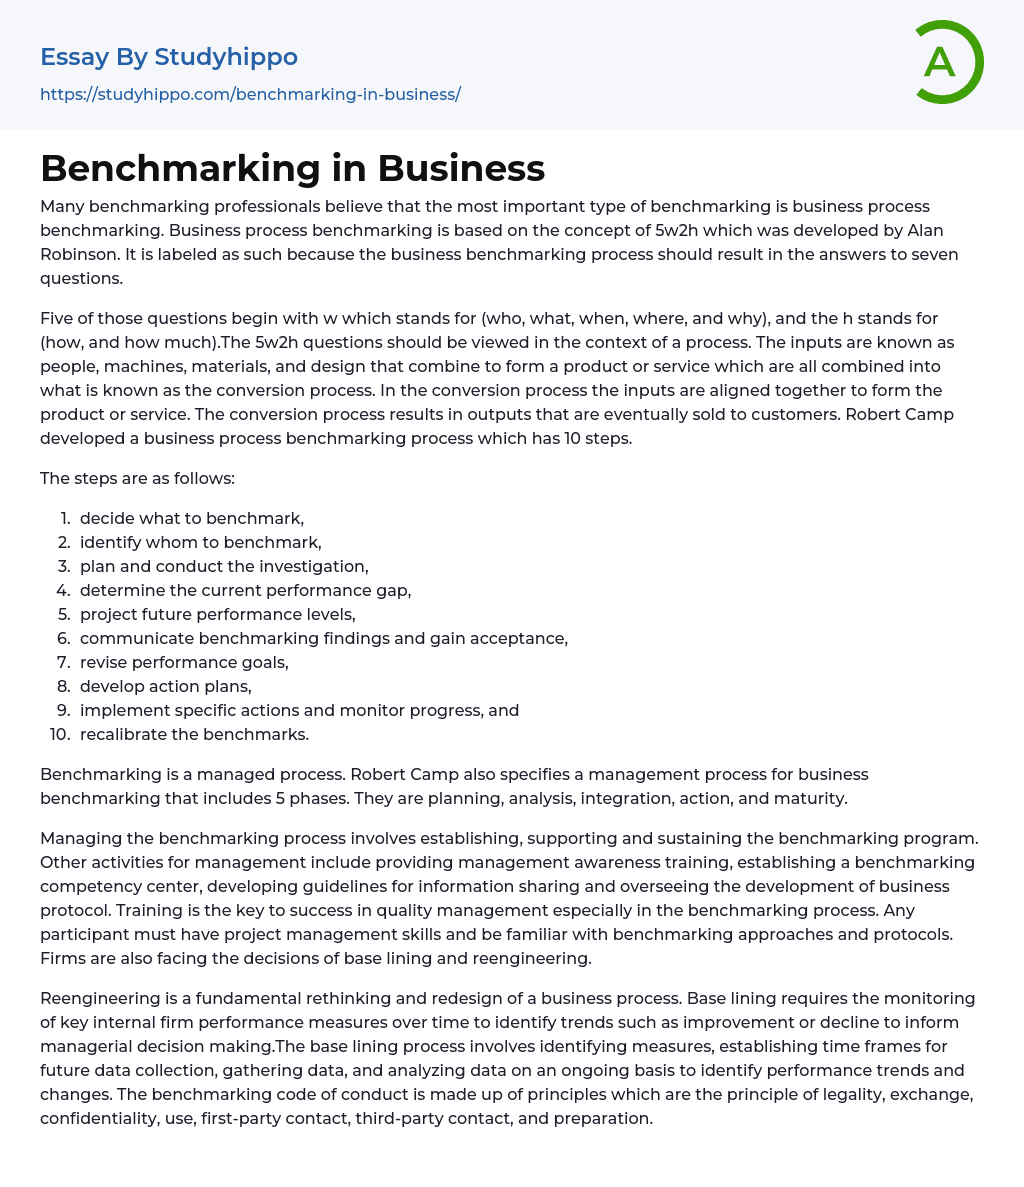 Benchmarking in Business Essay Example